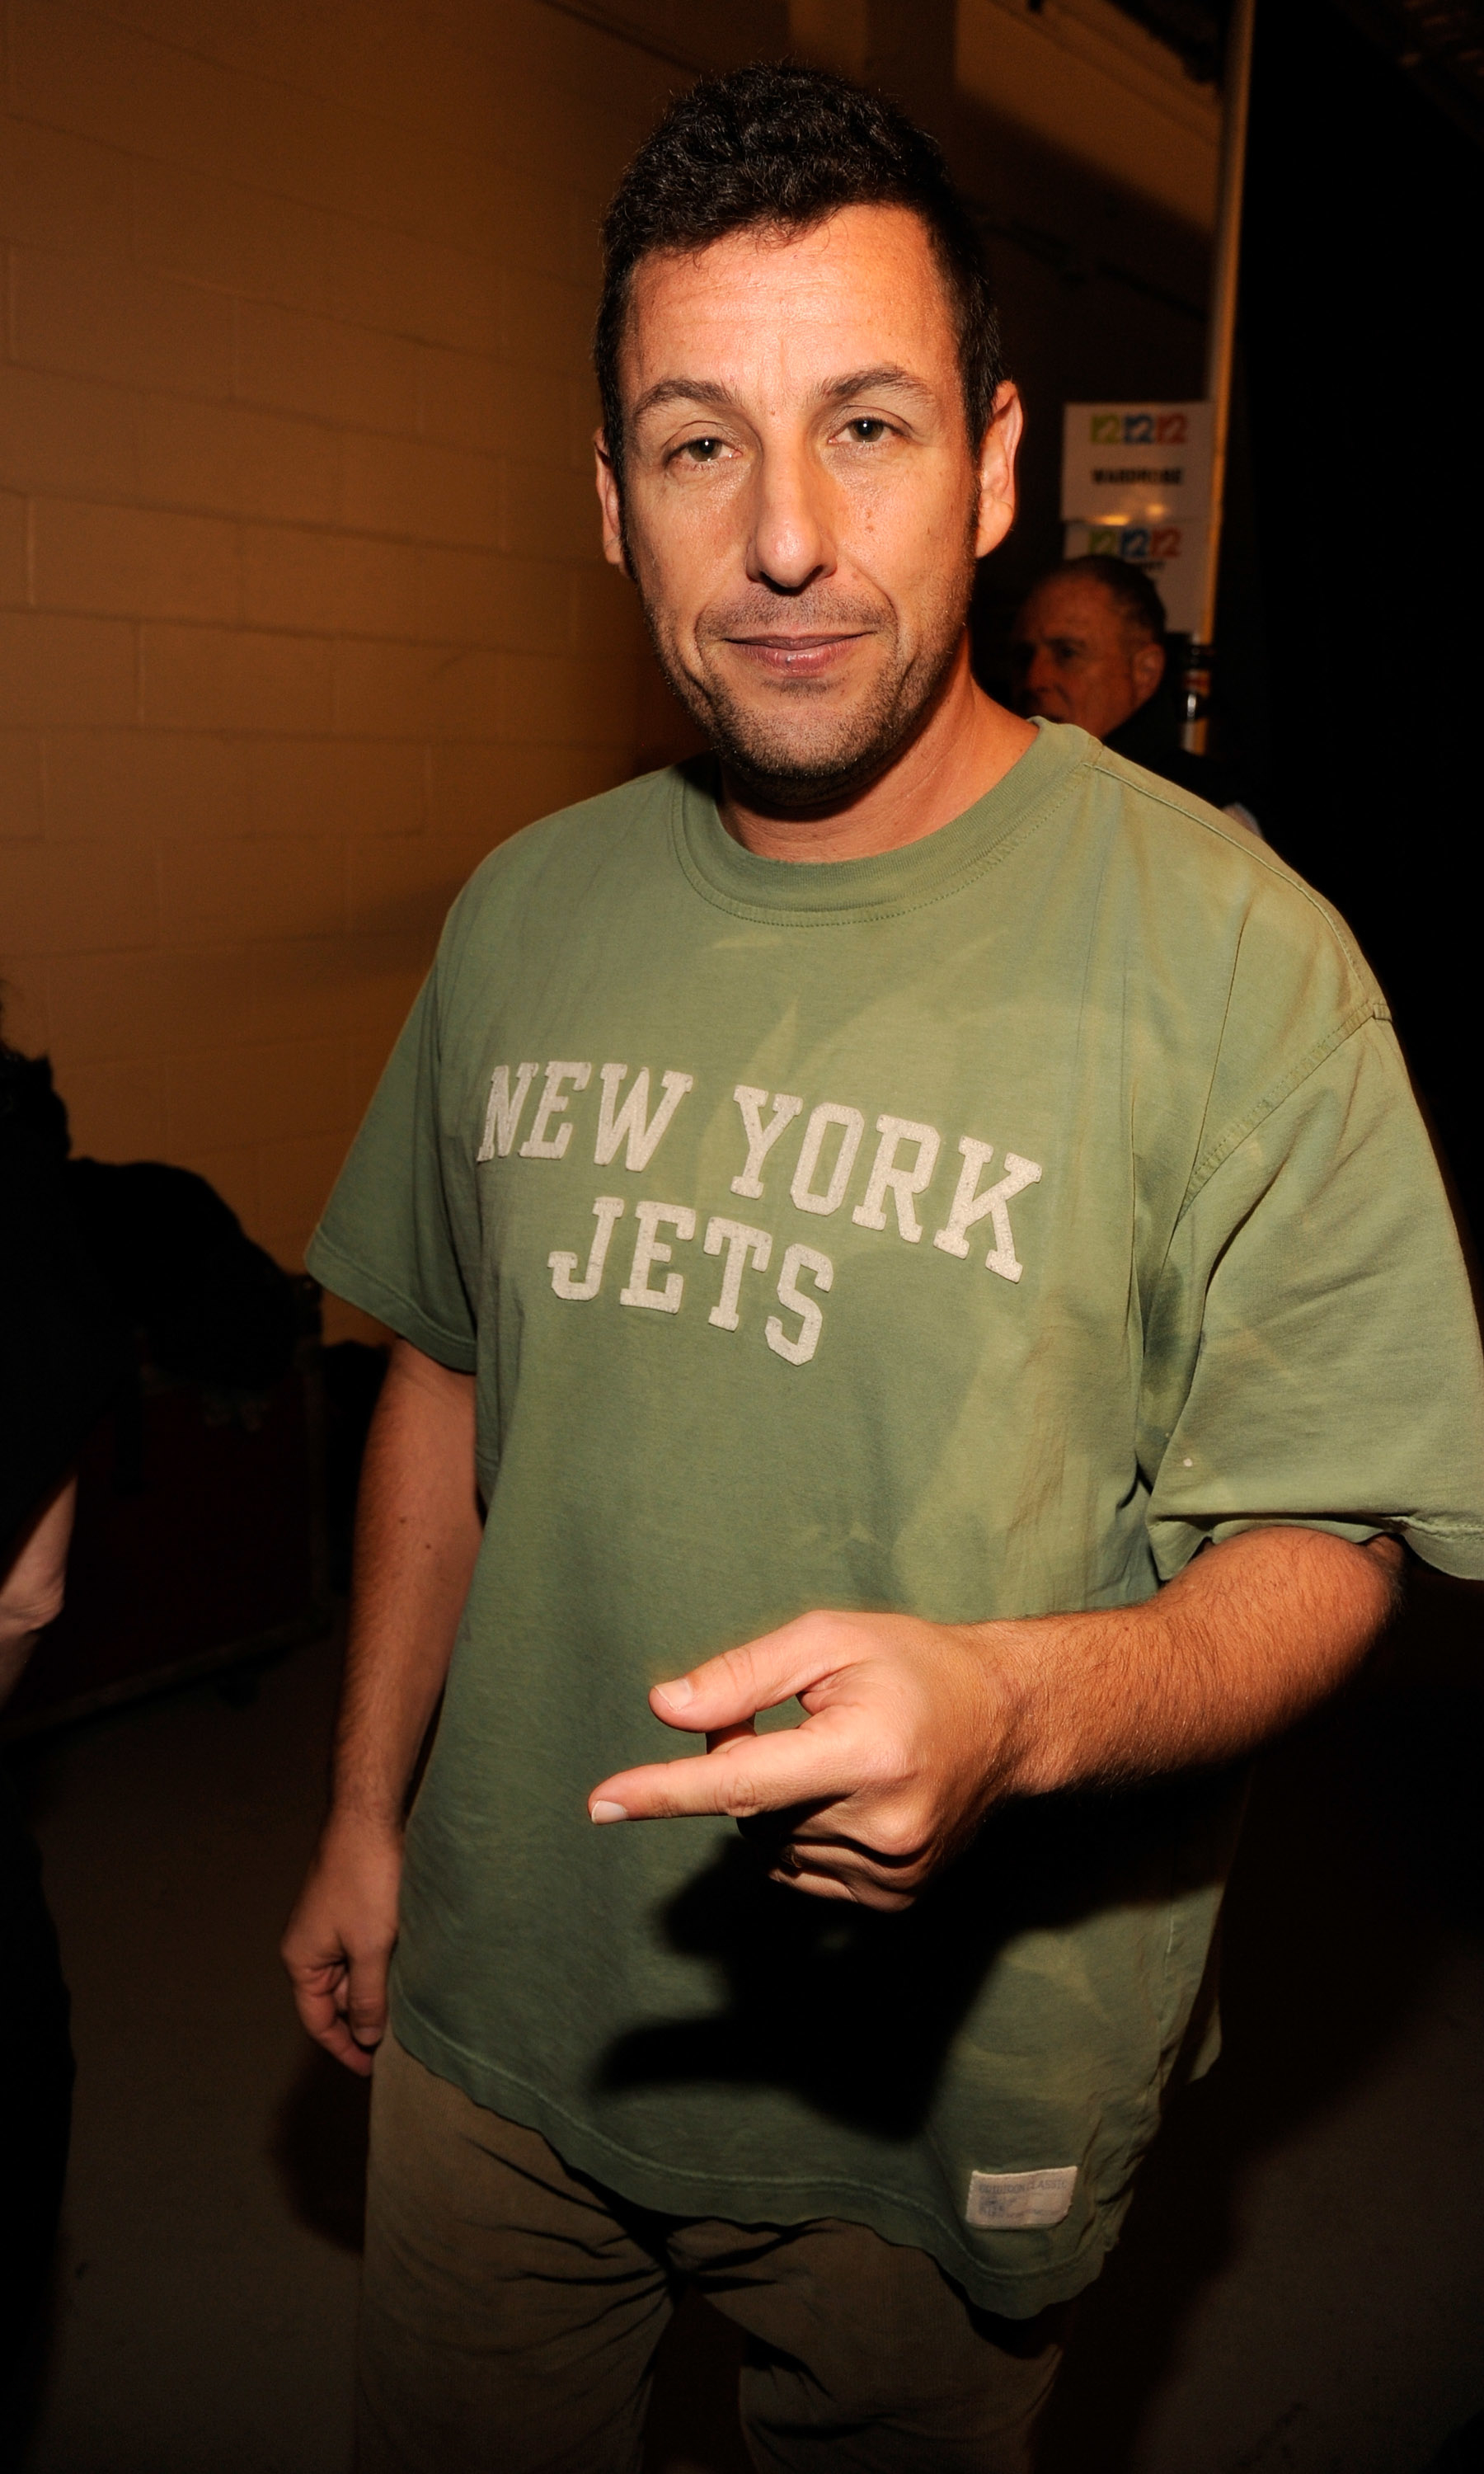 Adam wearing a &quot;New York Jets&quot; T-shirt, gesturing with his hand